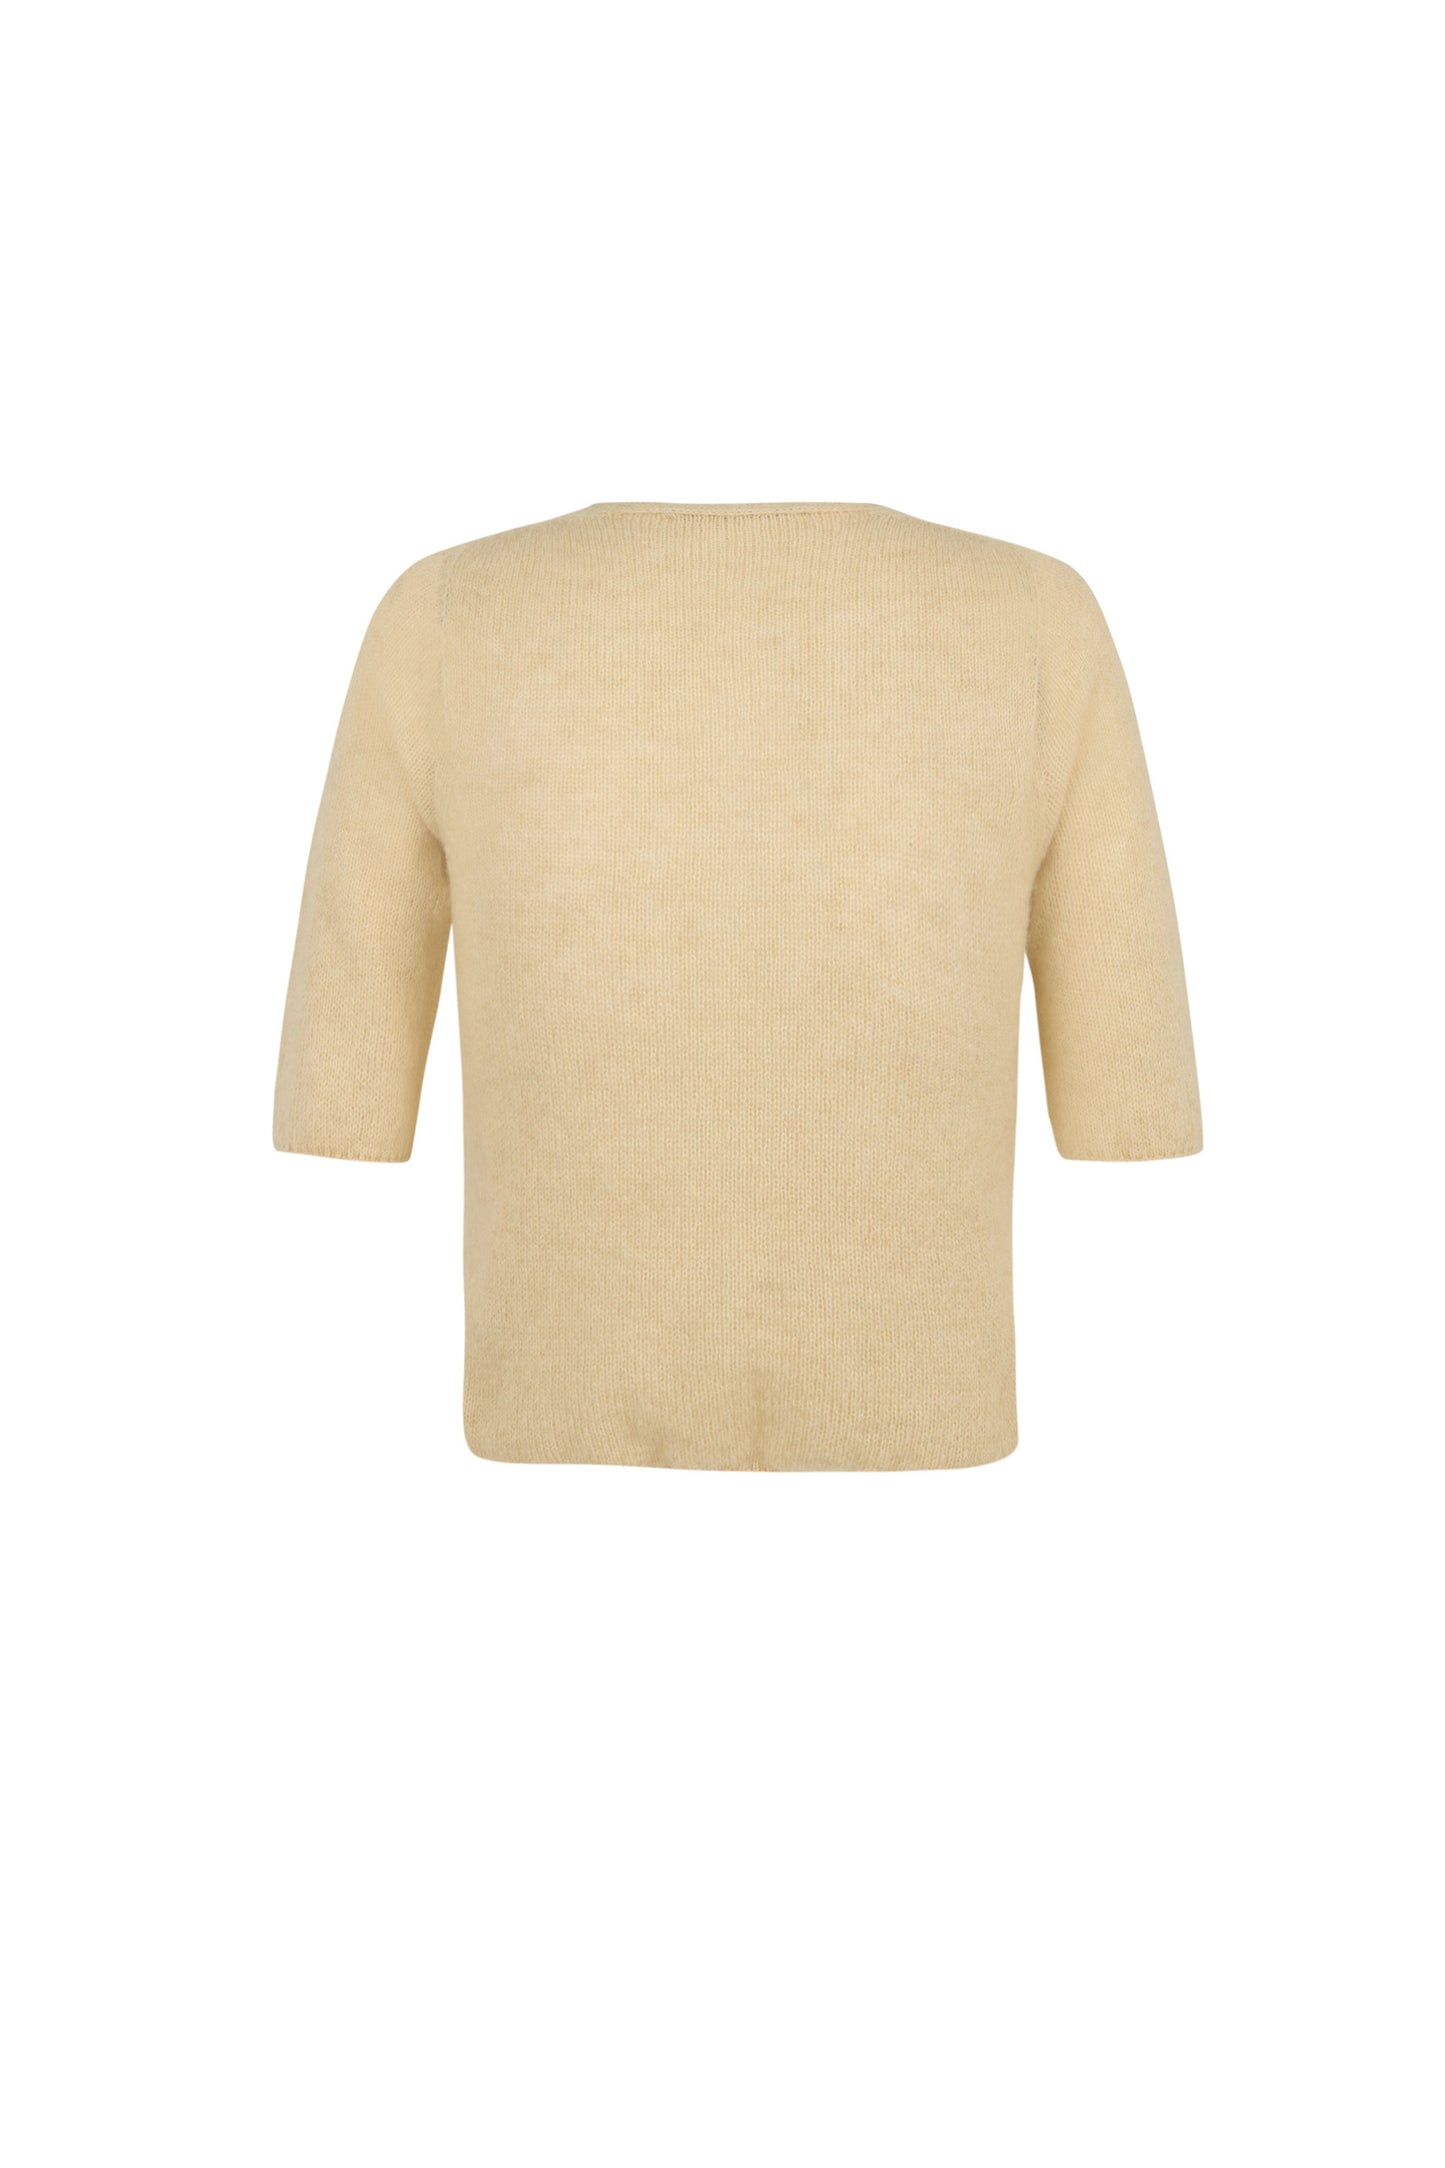 Chai,  ivory alpaca, cashmere and silk knit top 